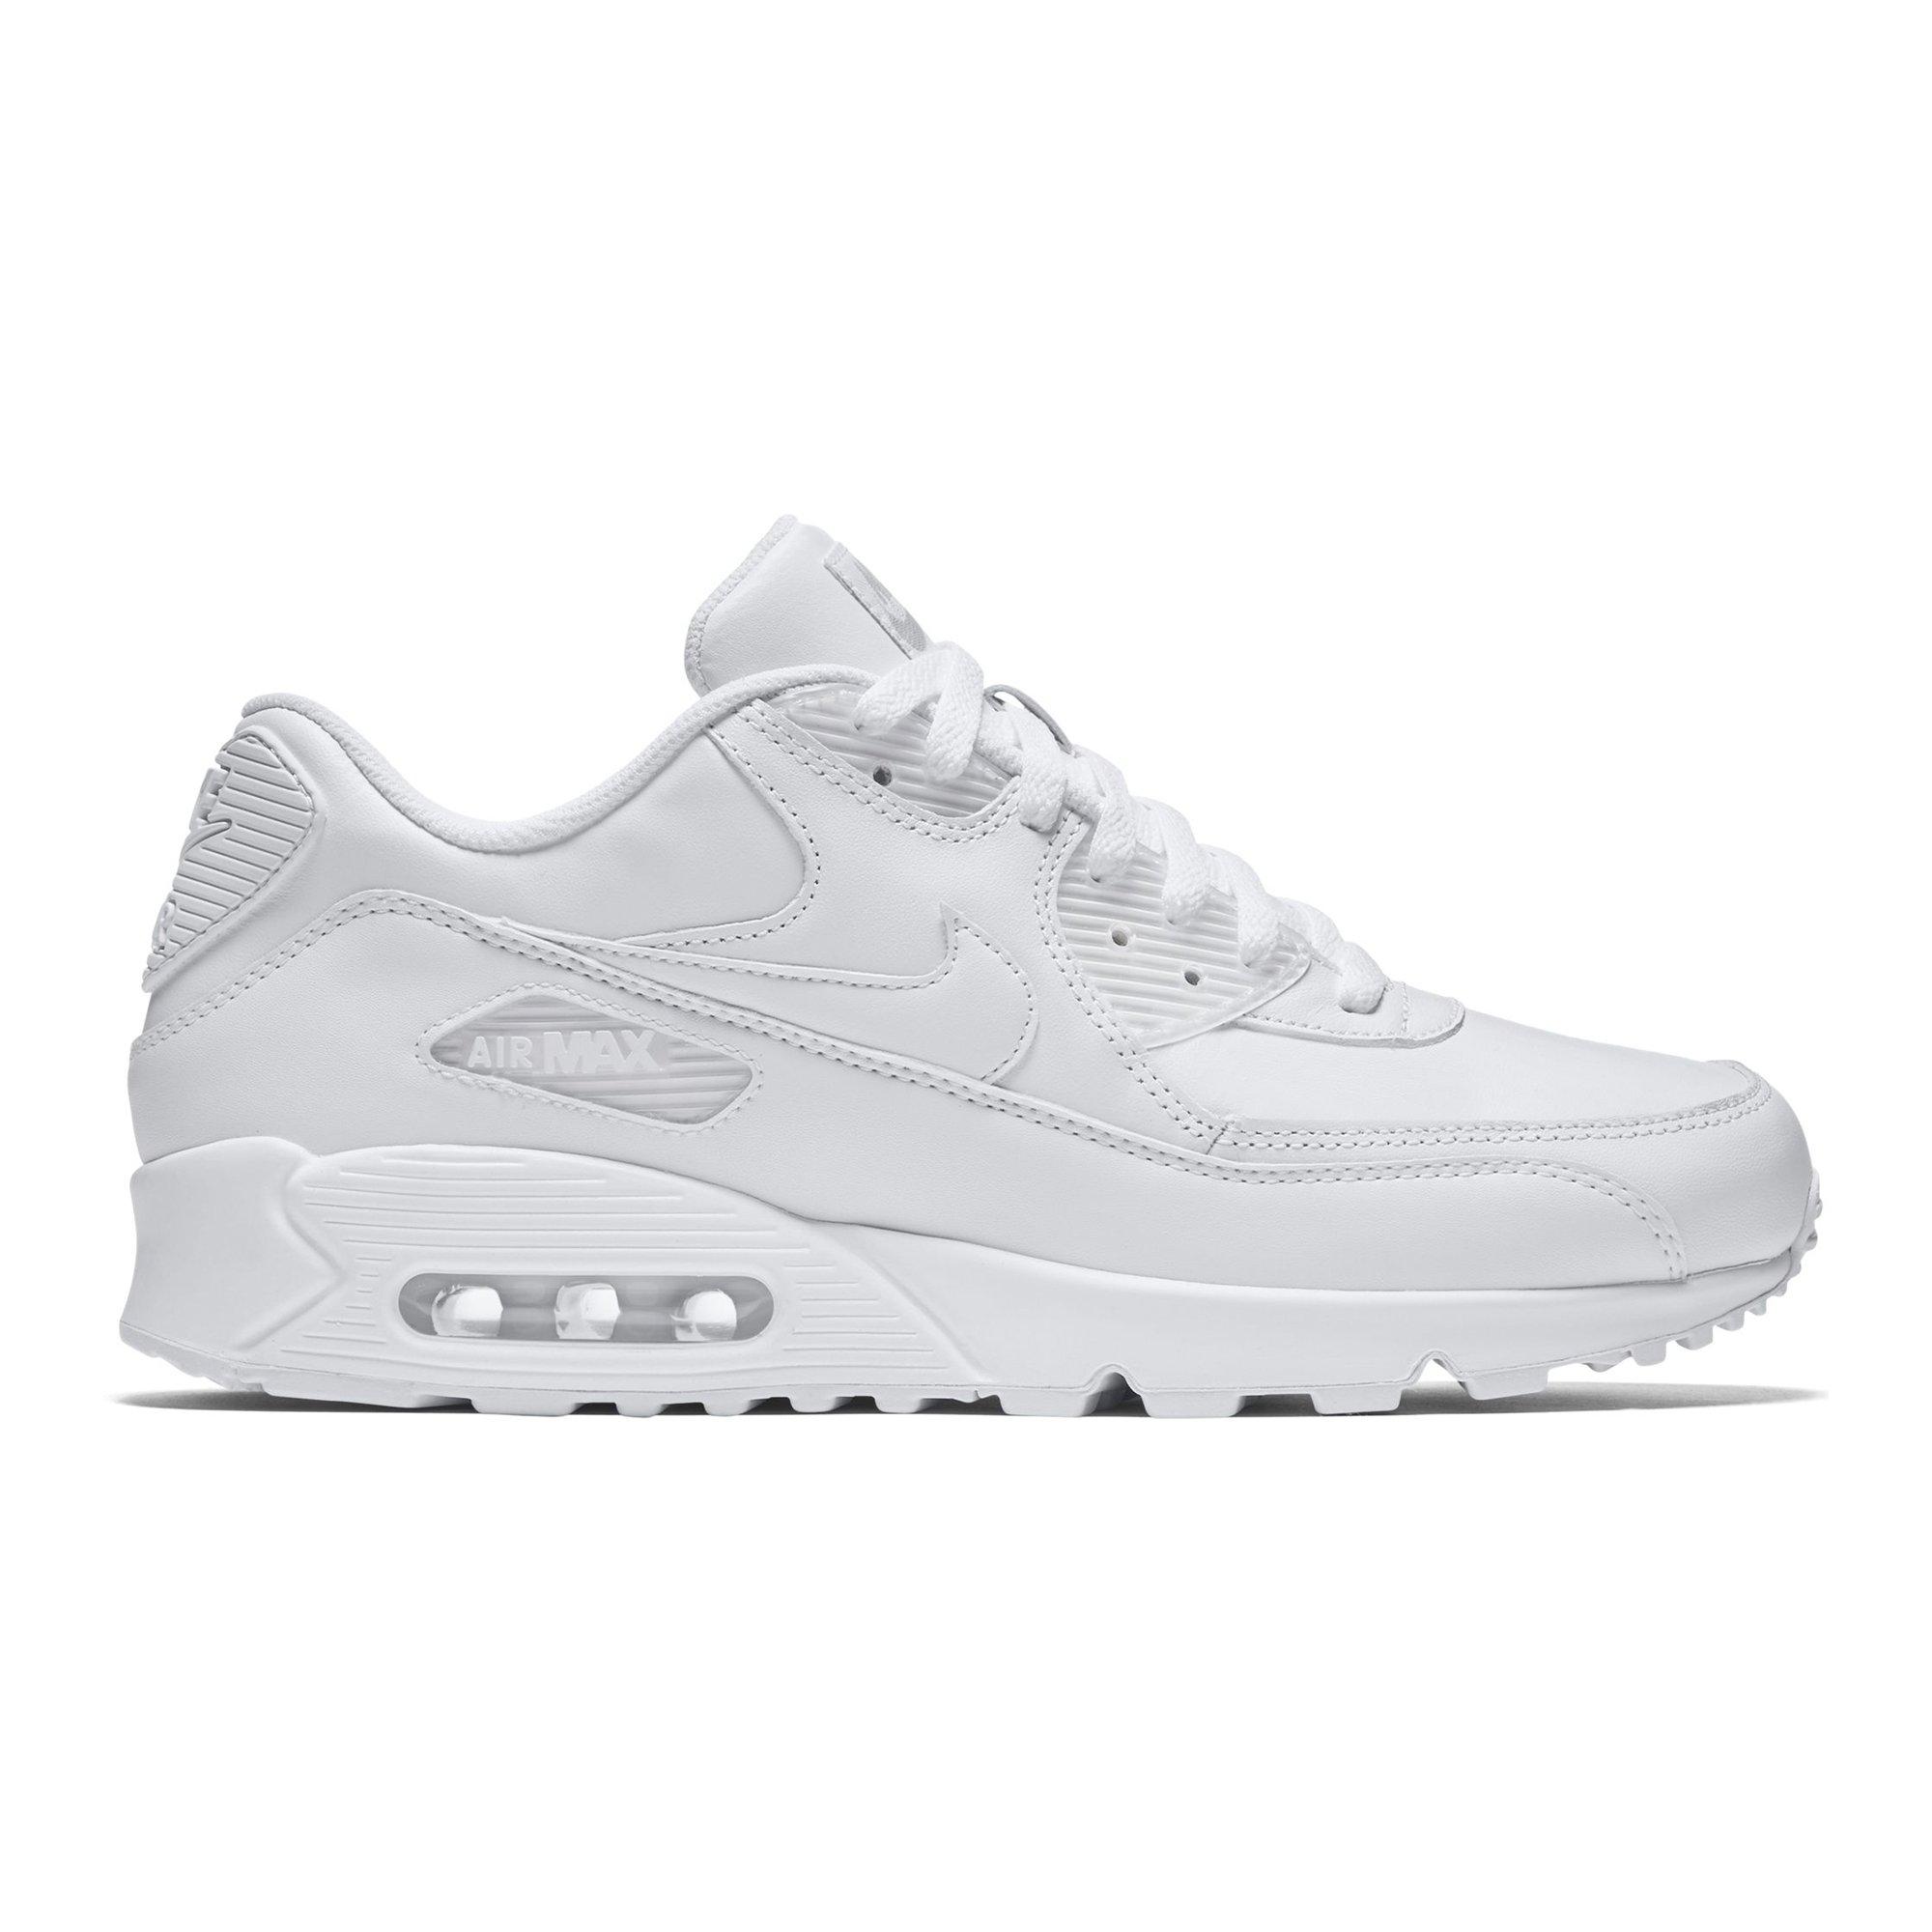 air max 90 all white leather mens